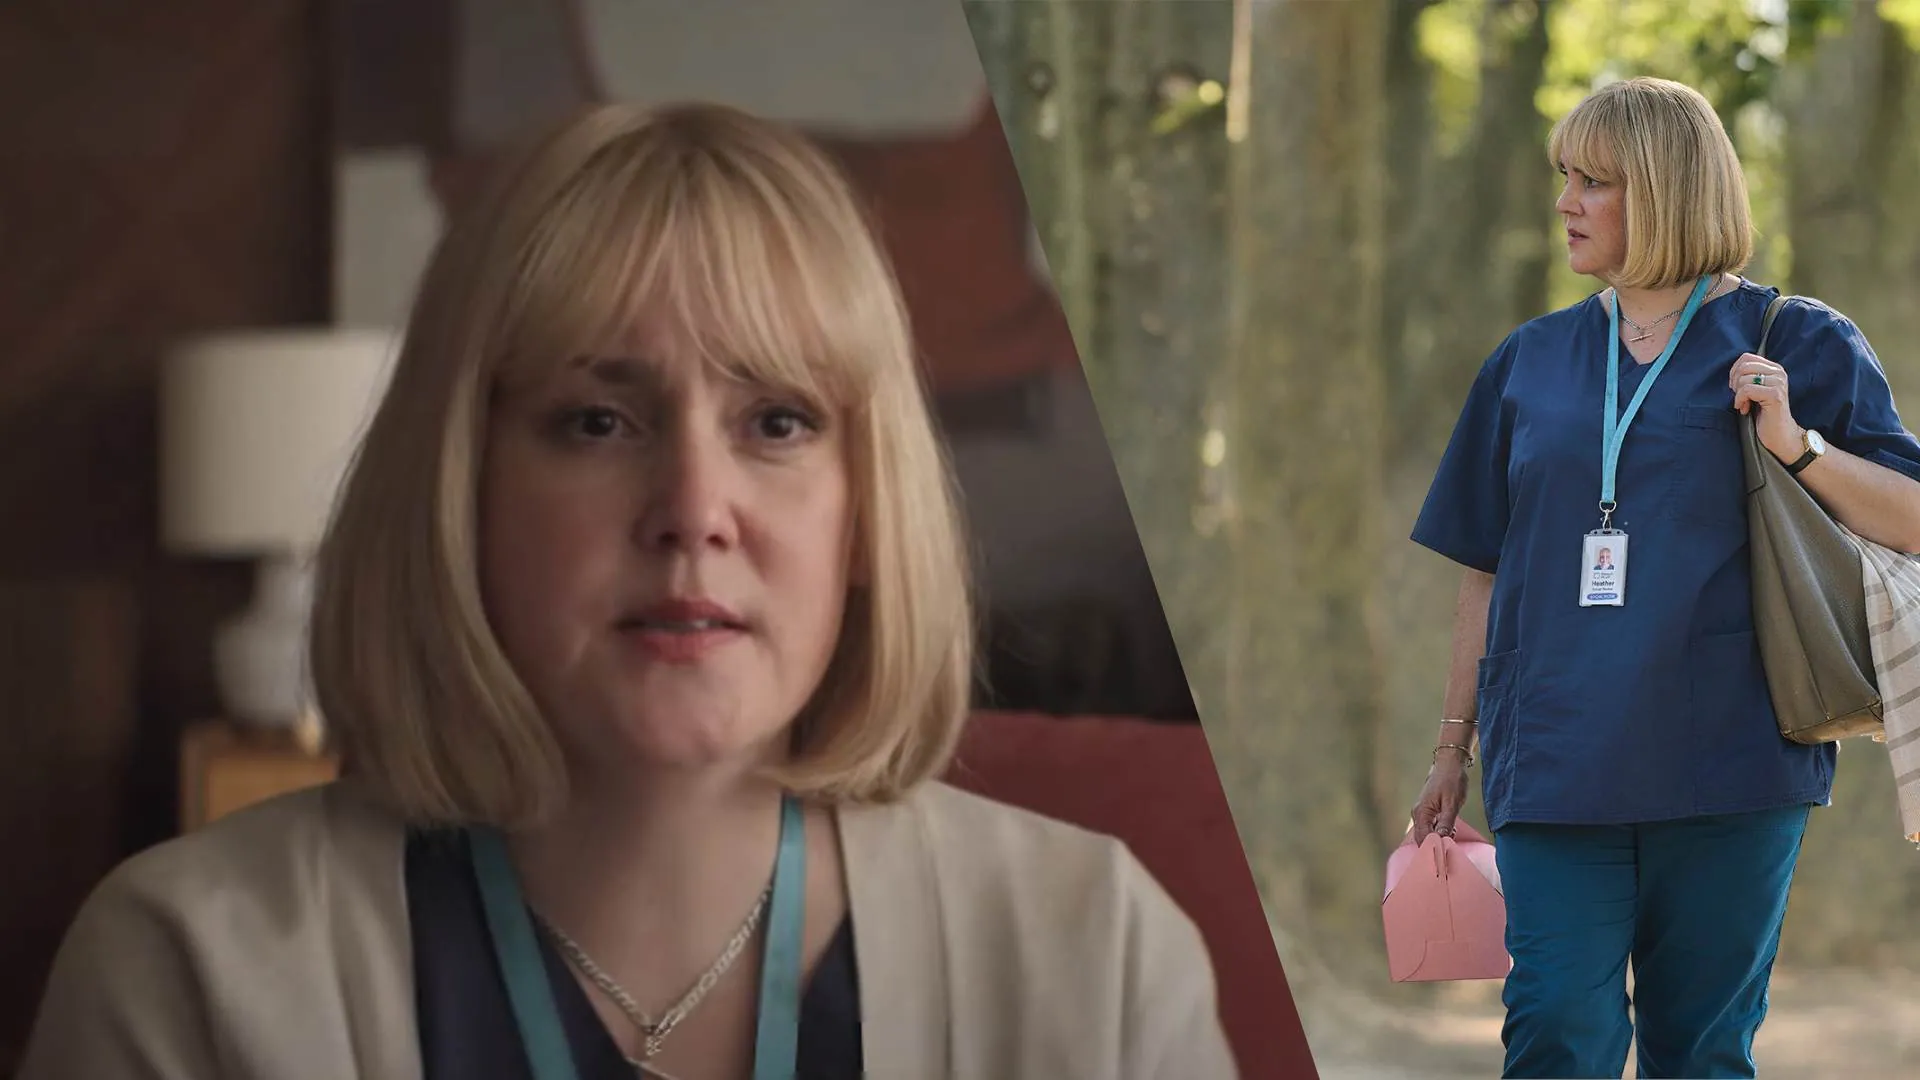 Melanie Lynskey Discusses Challenges of Portraying Heather Morris in 'The Tattooist of Auschwitz'